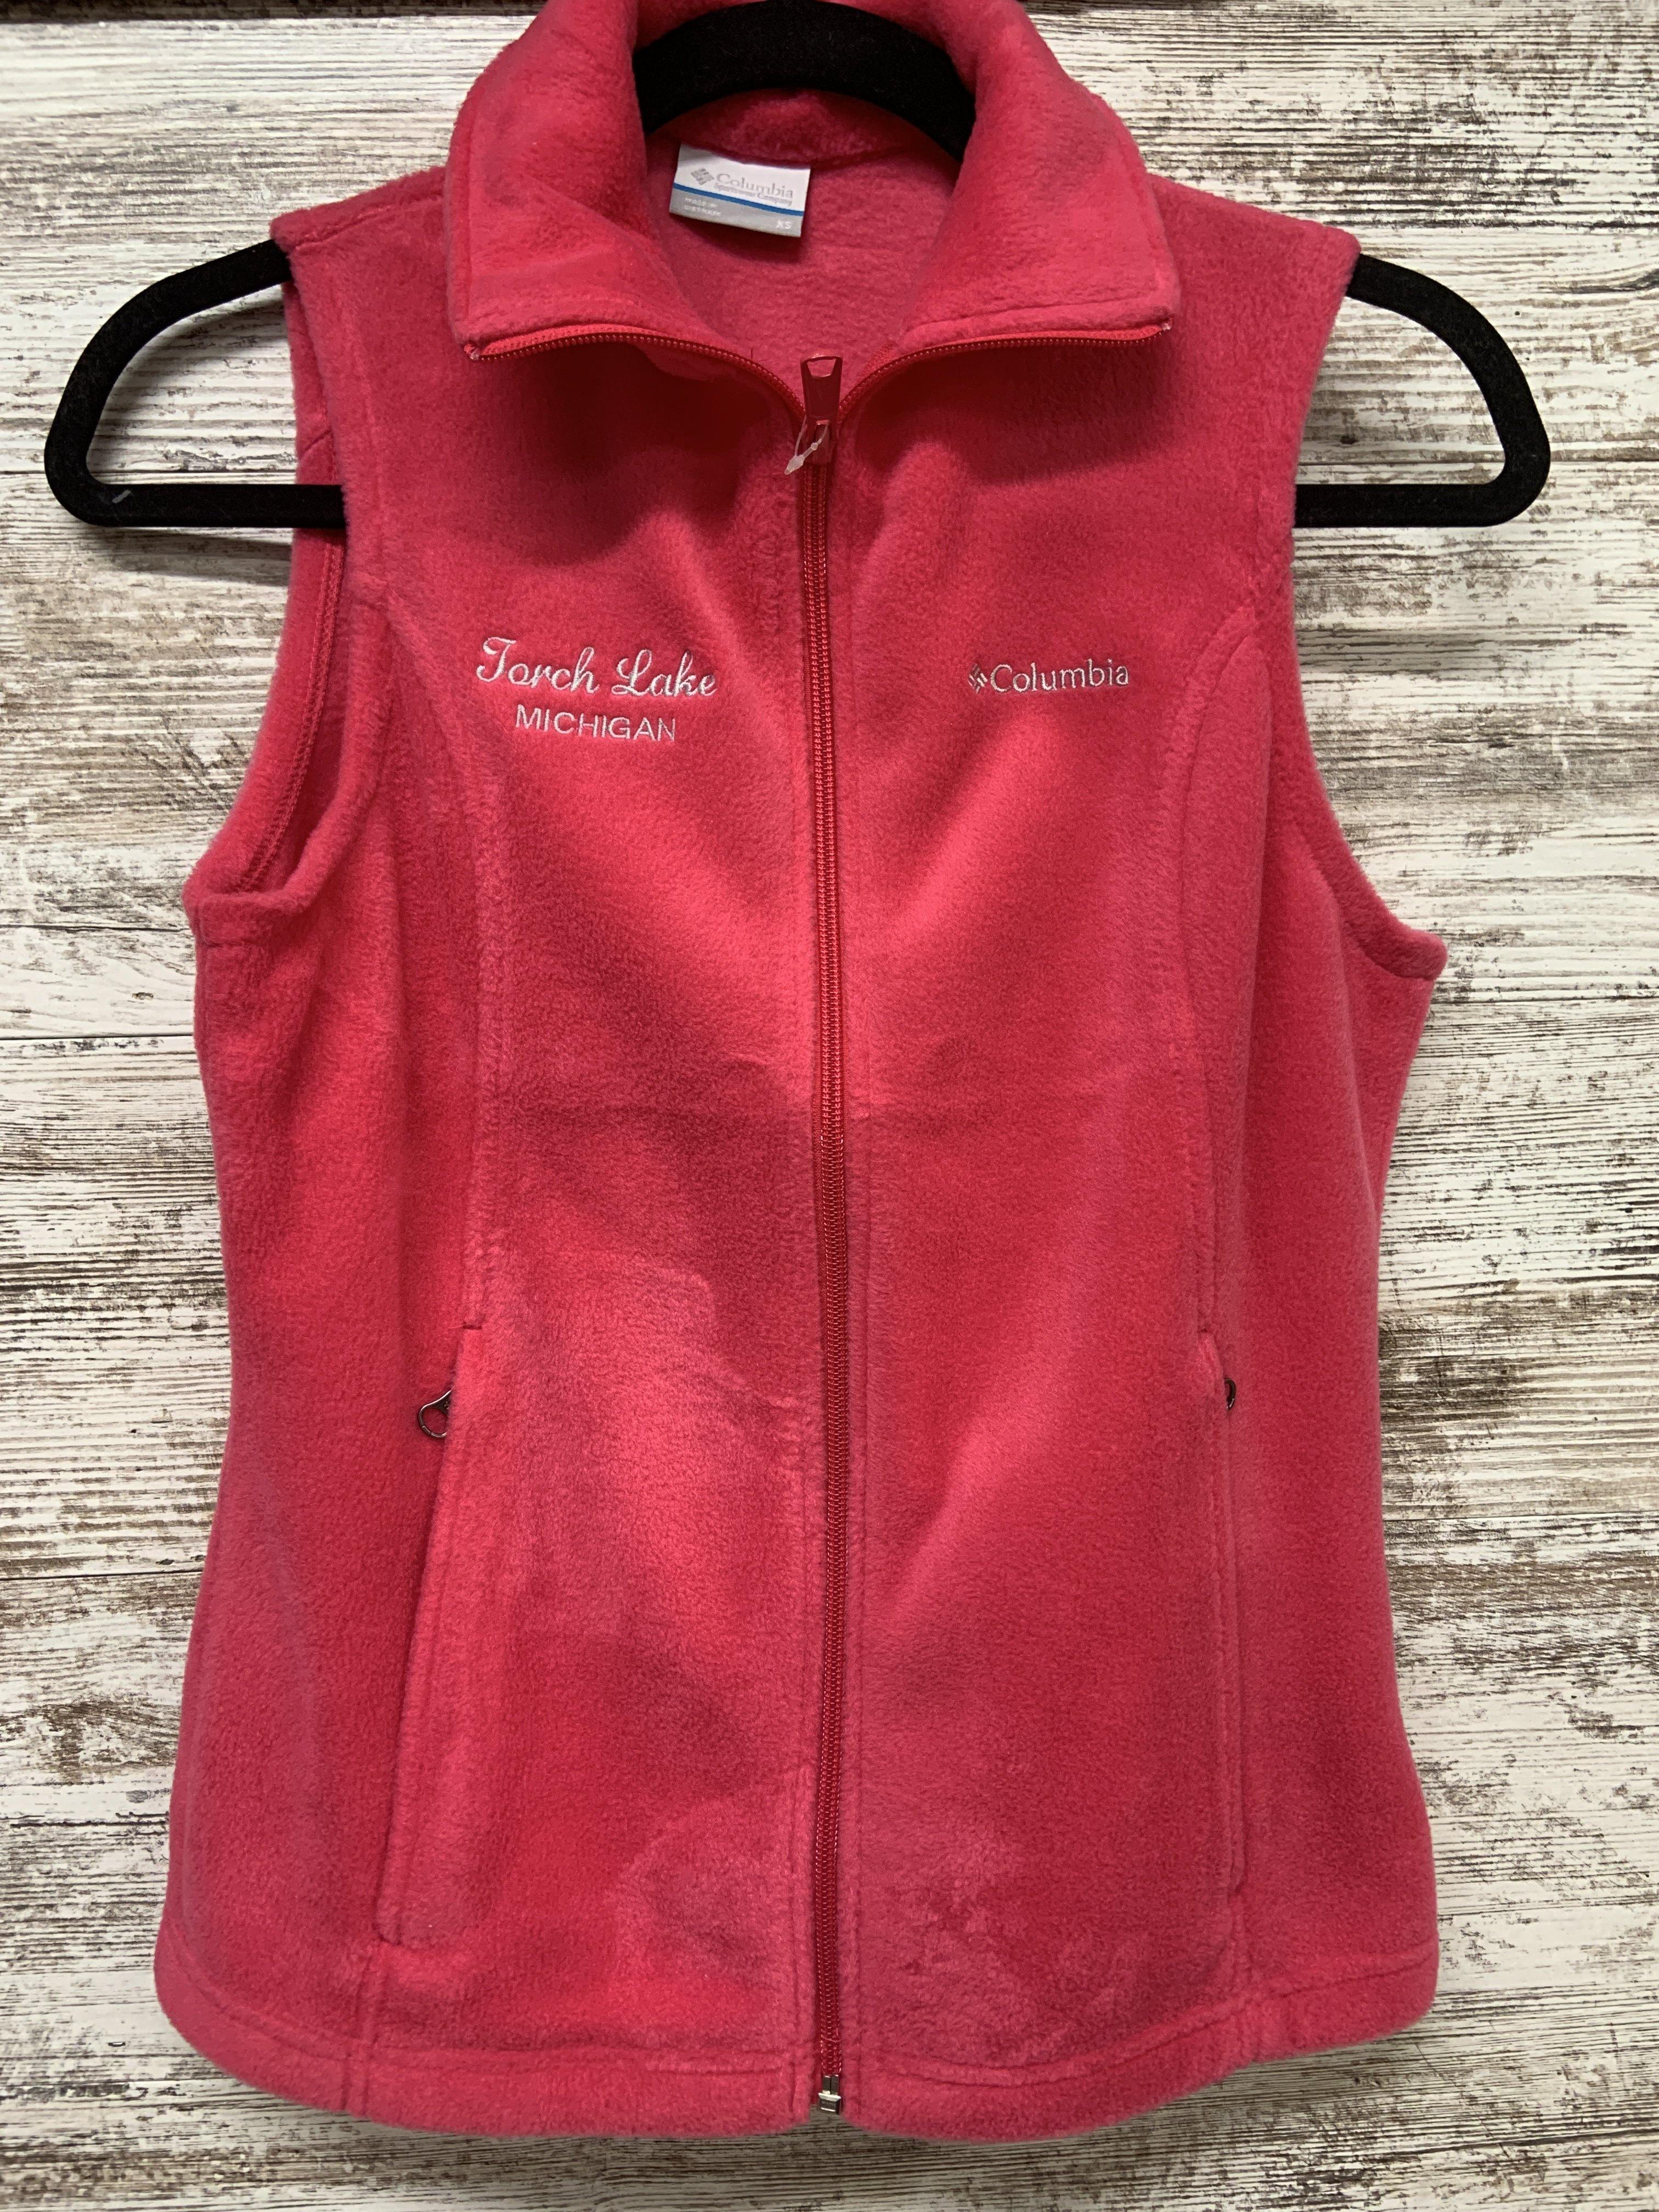 Columbia Torch Lake Vest - Vests - Columbia - Butch's Tackle & Marine -  Torch Lake Apparel, Sweatshirts, Gifts & Tritoon Rentals